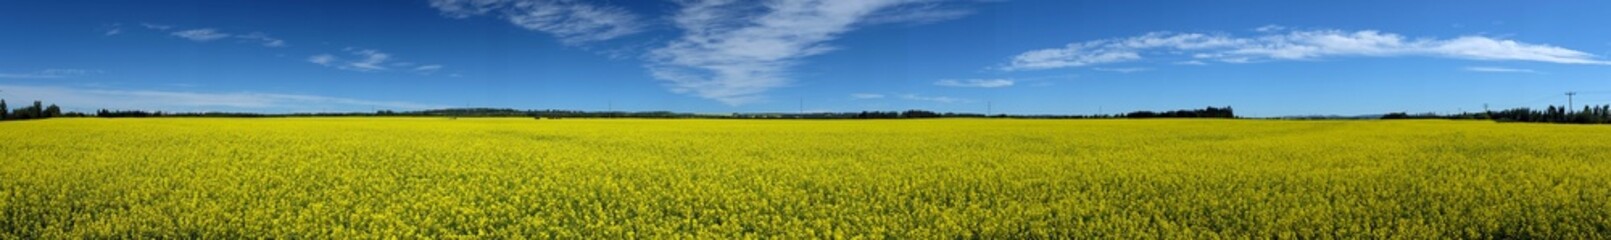 Panoramic shot of a blooming canola field under a blue sky